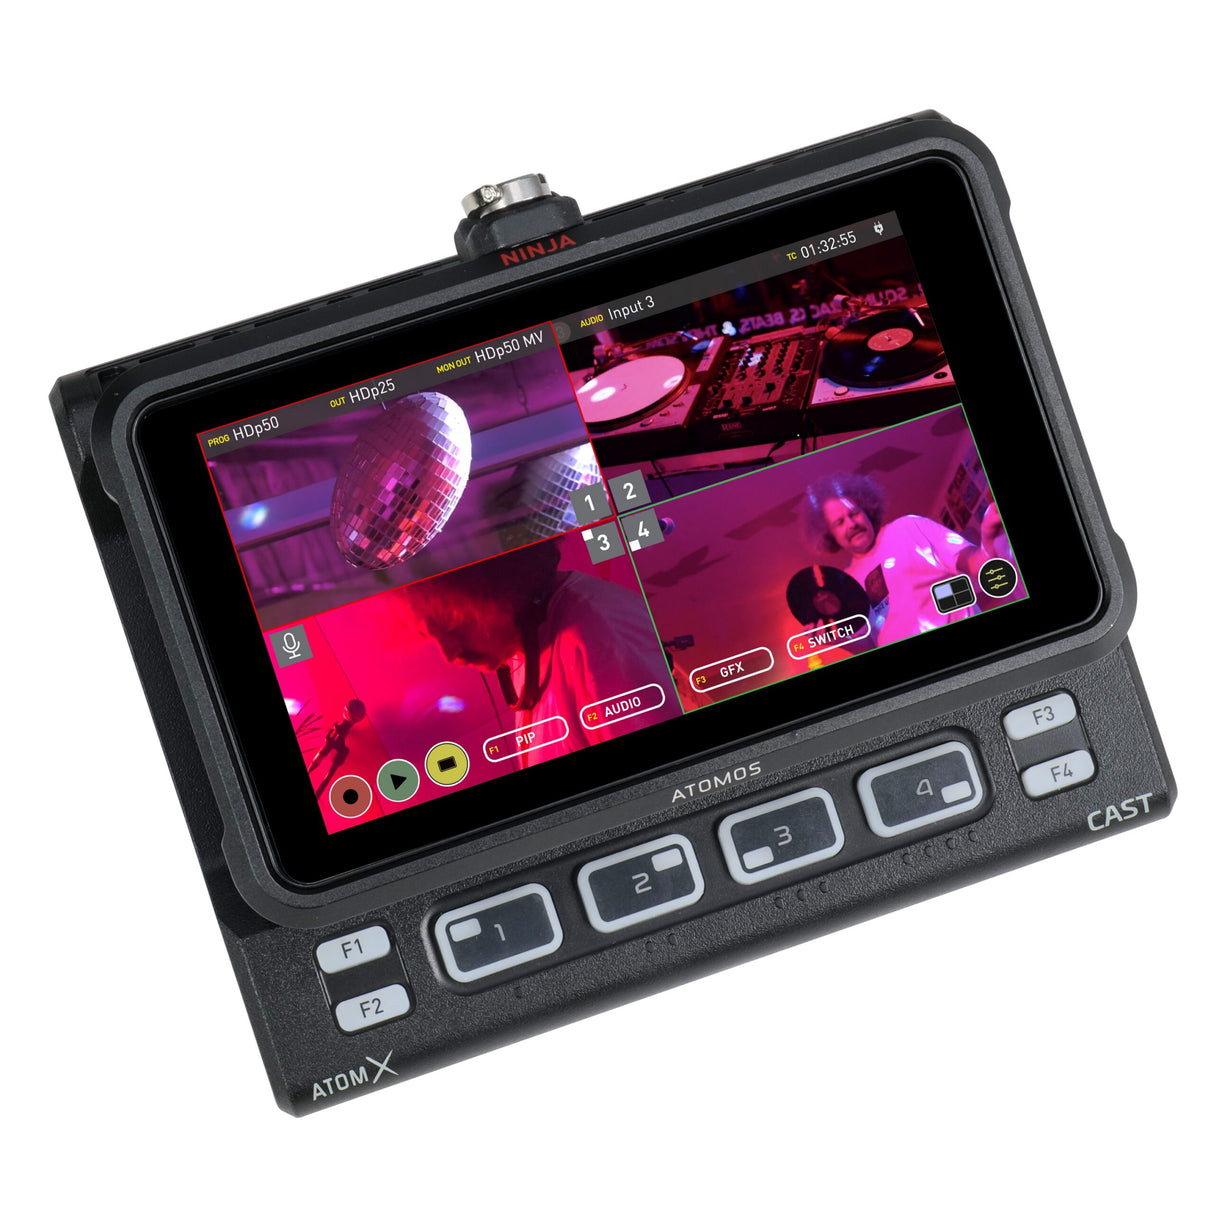 Atomos AtomX Cast 4 x HDMI Switching and Streaming Dock for Ninja V/V+